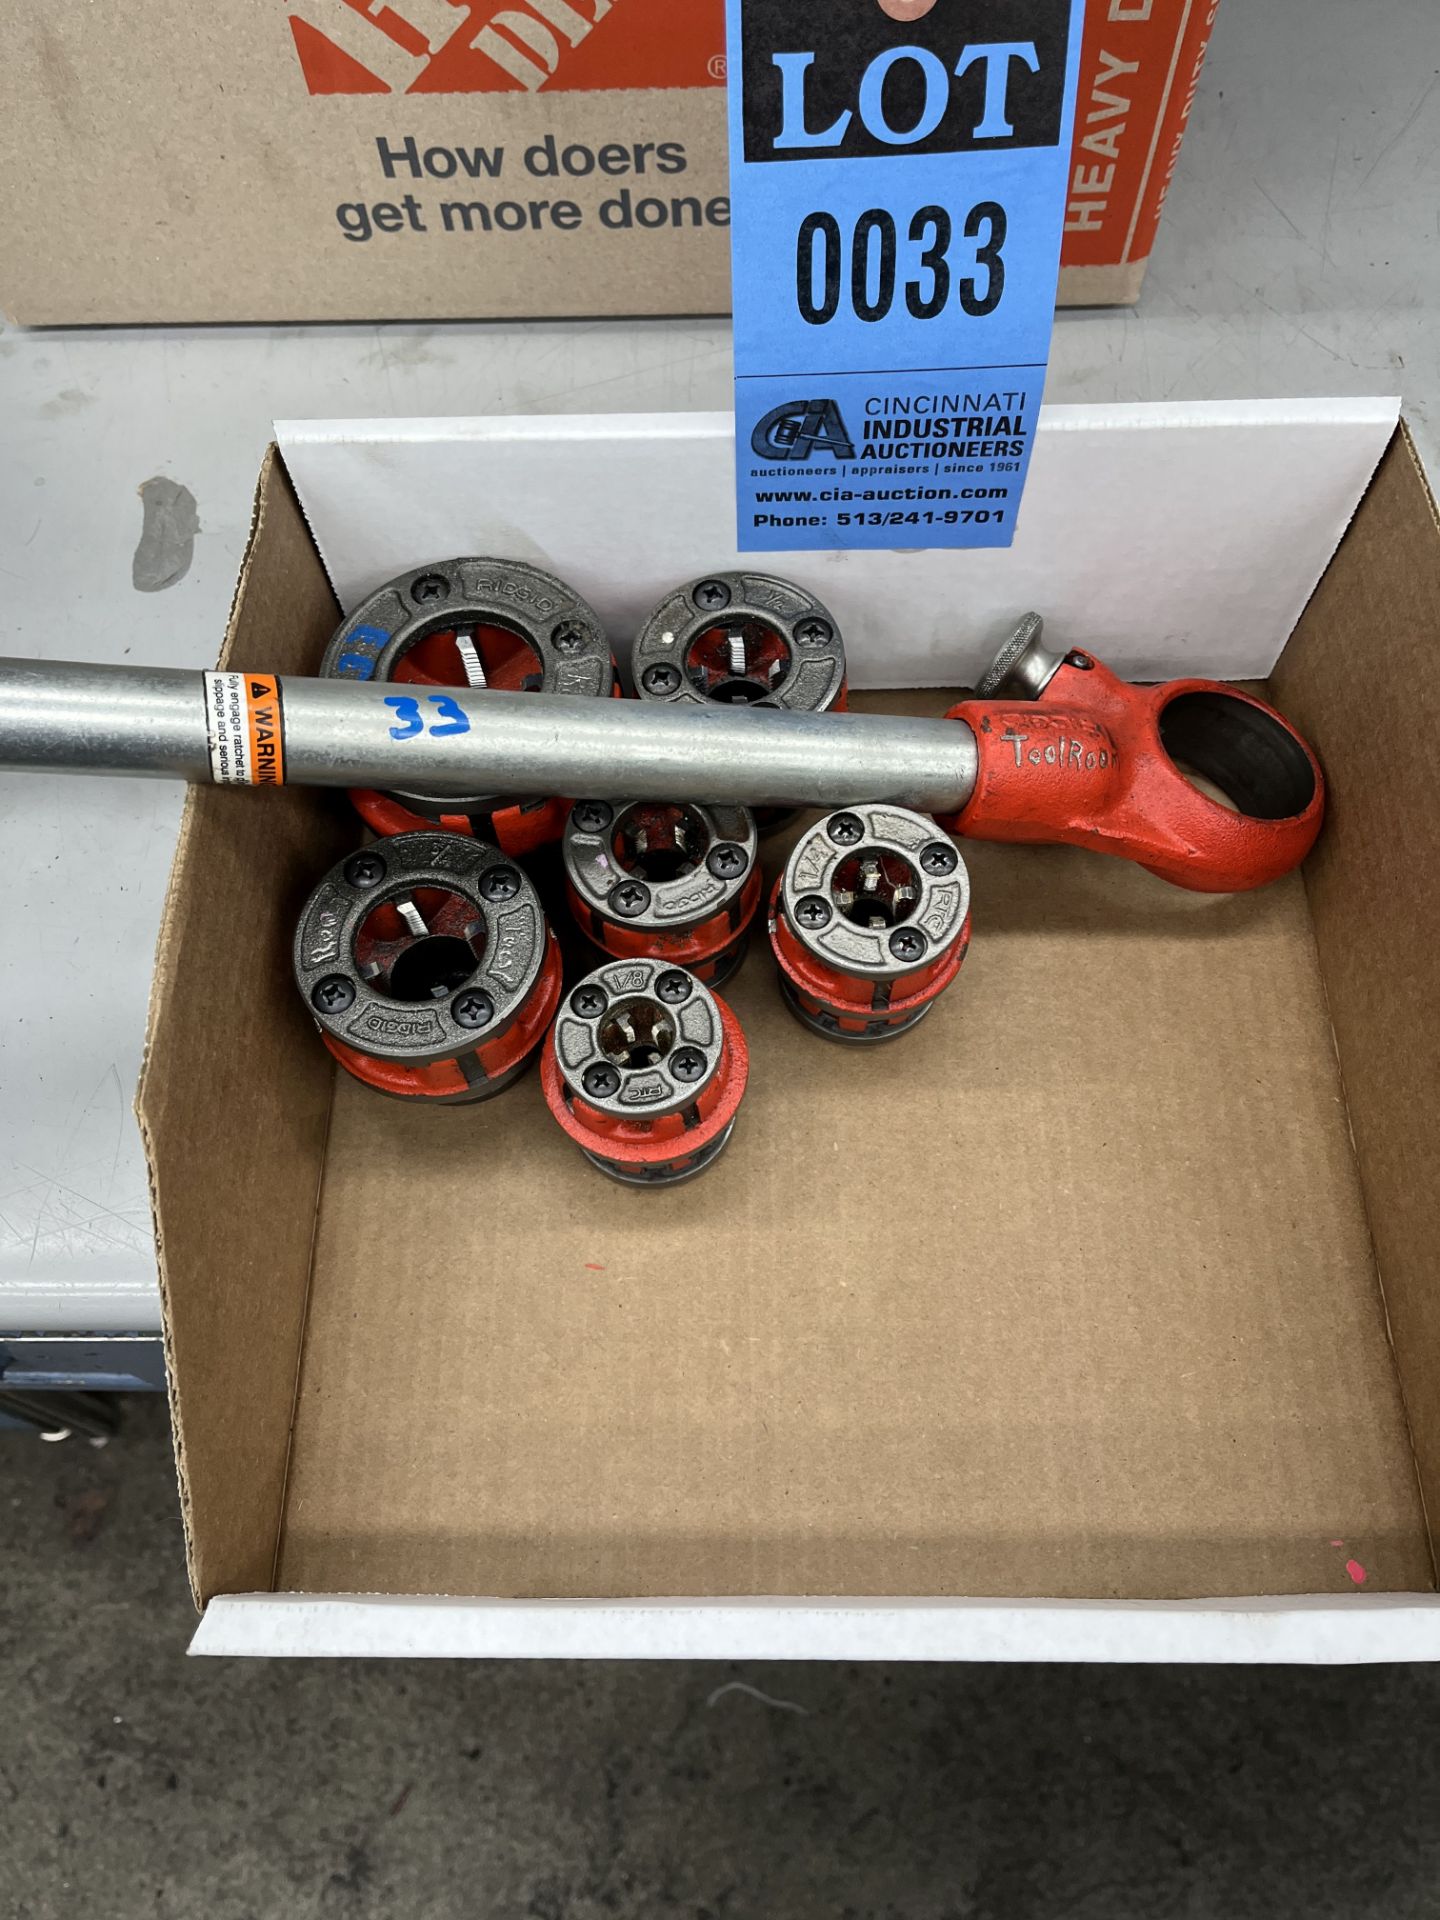 RIDGID PIPE DIE WRENCHES WITH 1", 3/4", 1/2", 3/8", 1/4", 1/8" DIE HEADS